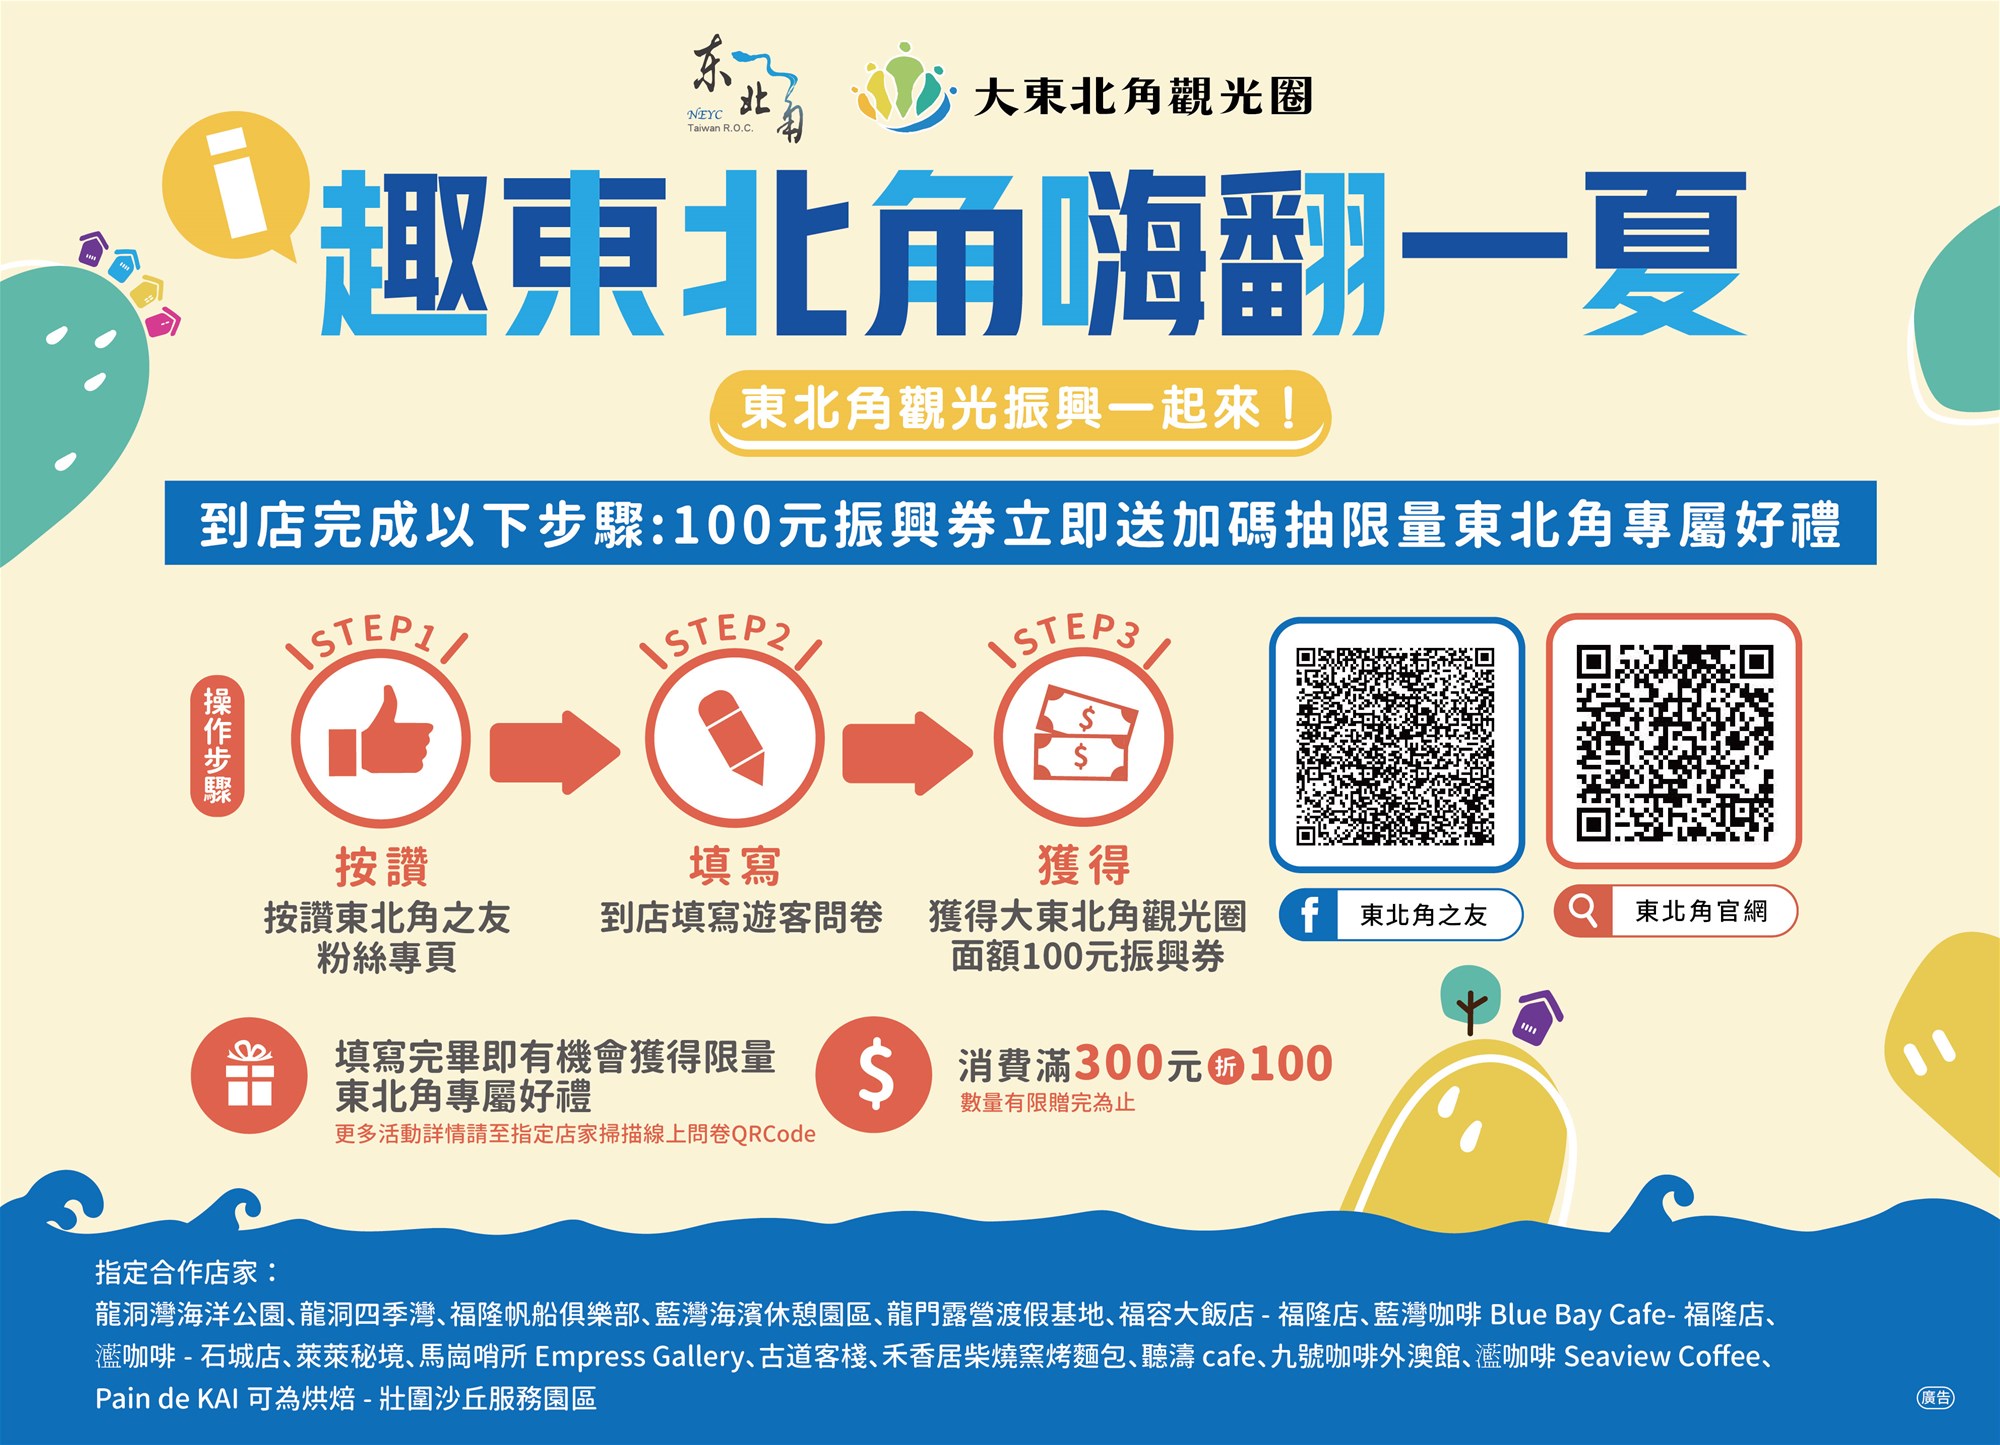 Operation flow chart of "Greater Northeast Corner Sightseeing Circle Promotion Ticket"